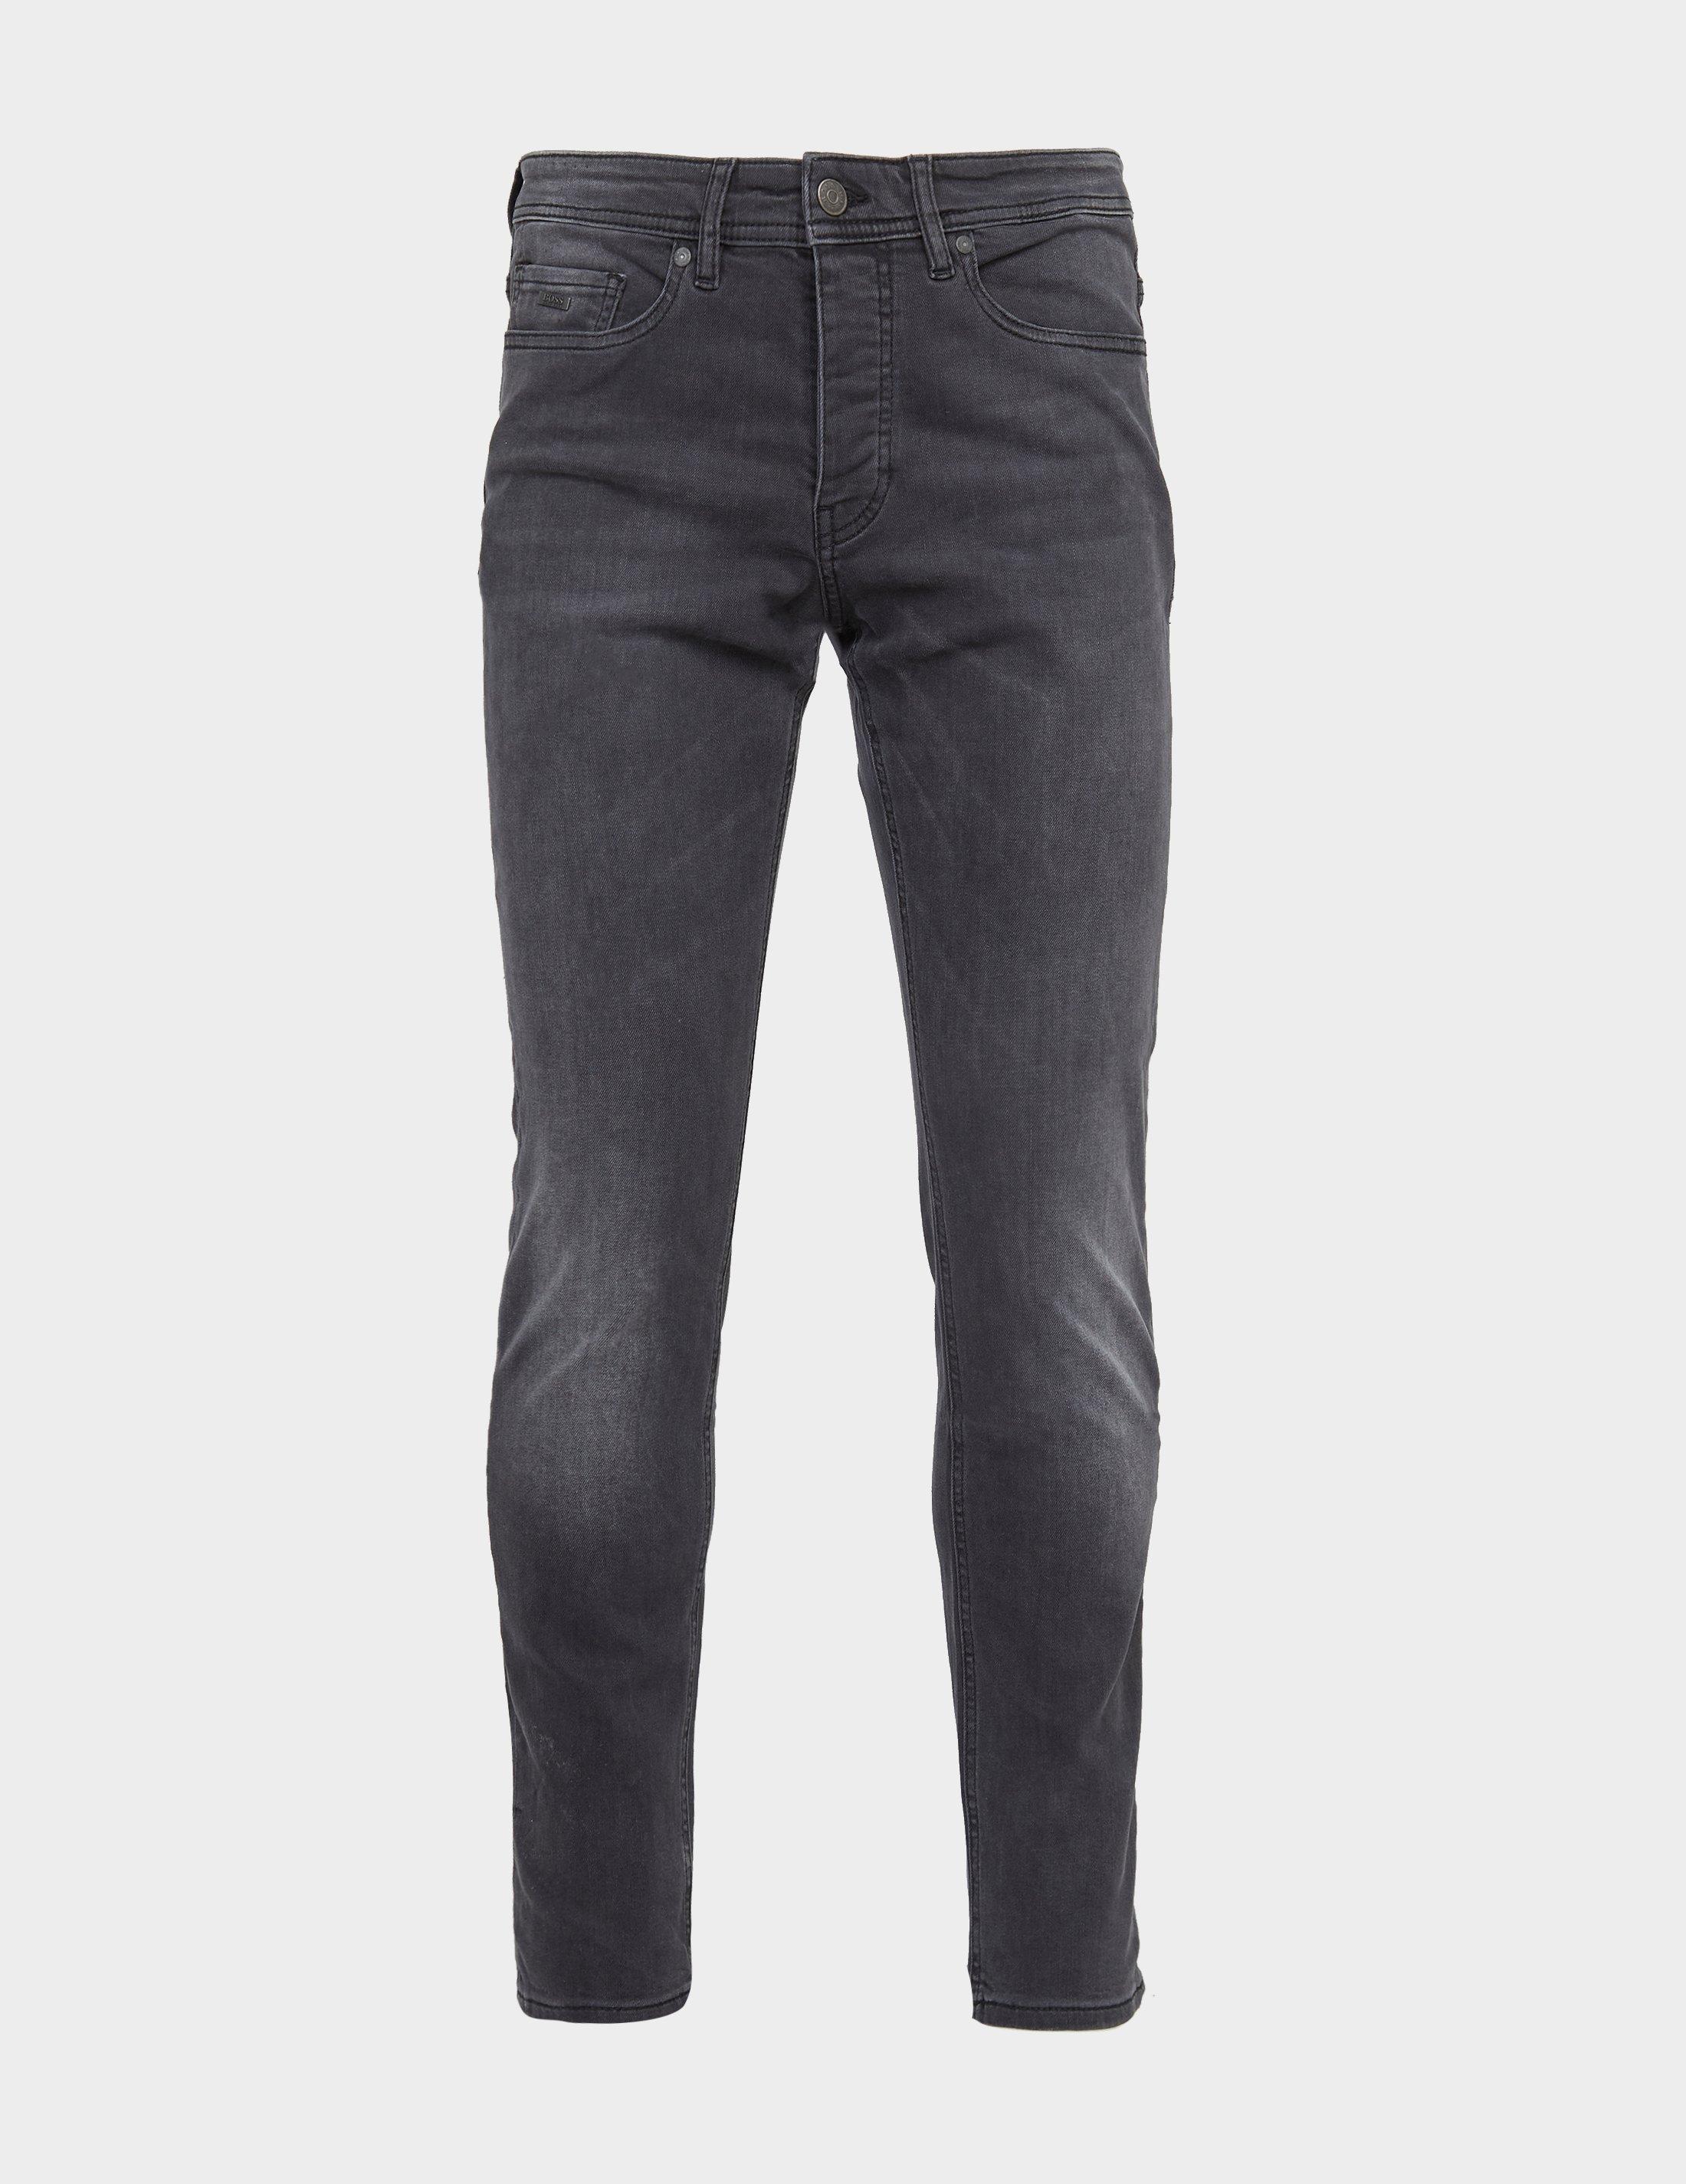 Grey BOSS Taber Stretch Tapered Jeans 